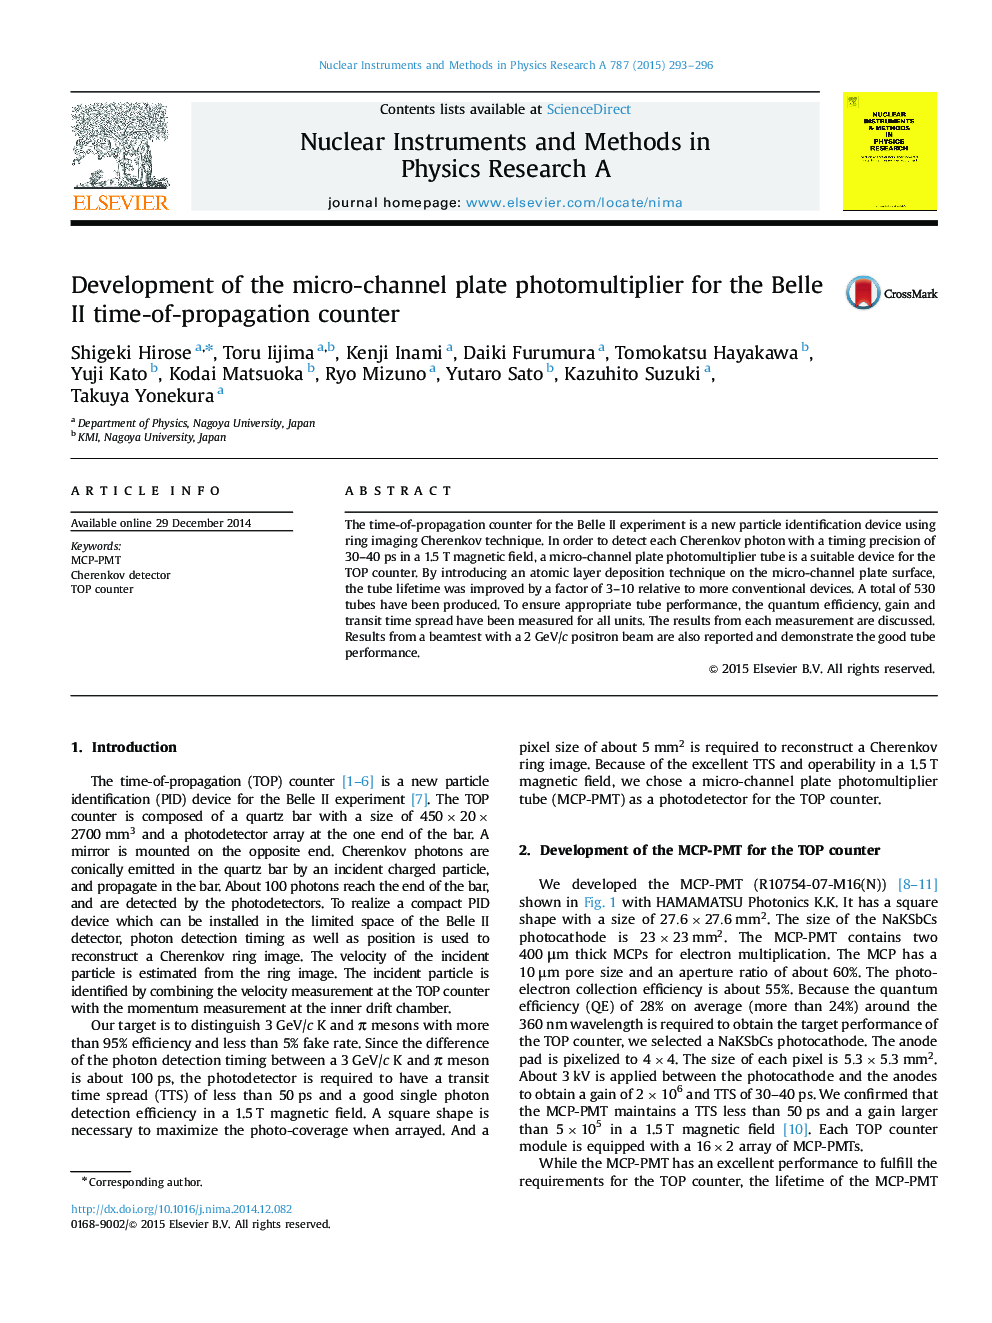 Development of the micro-channel plate photomultiplier for the Belle II time-of-propagation counter